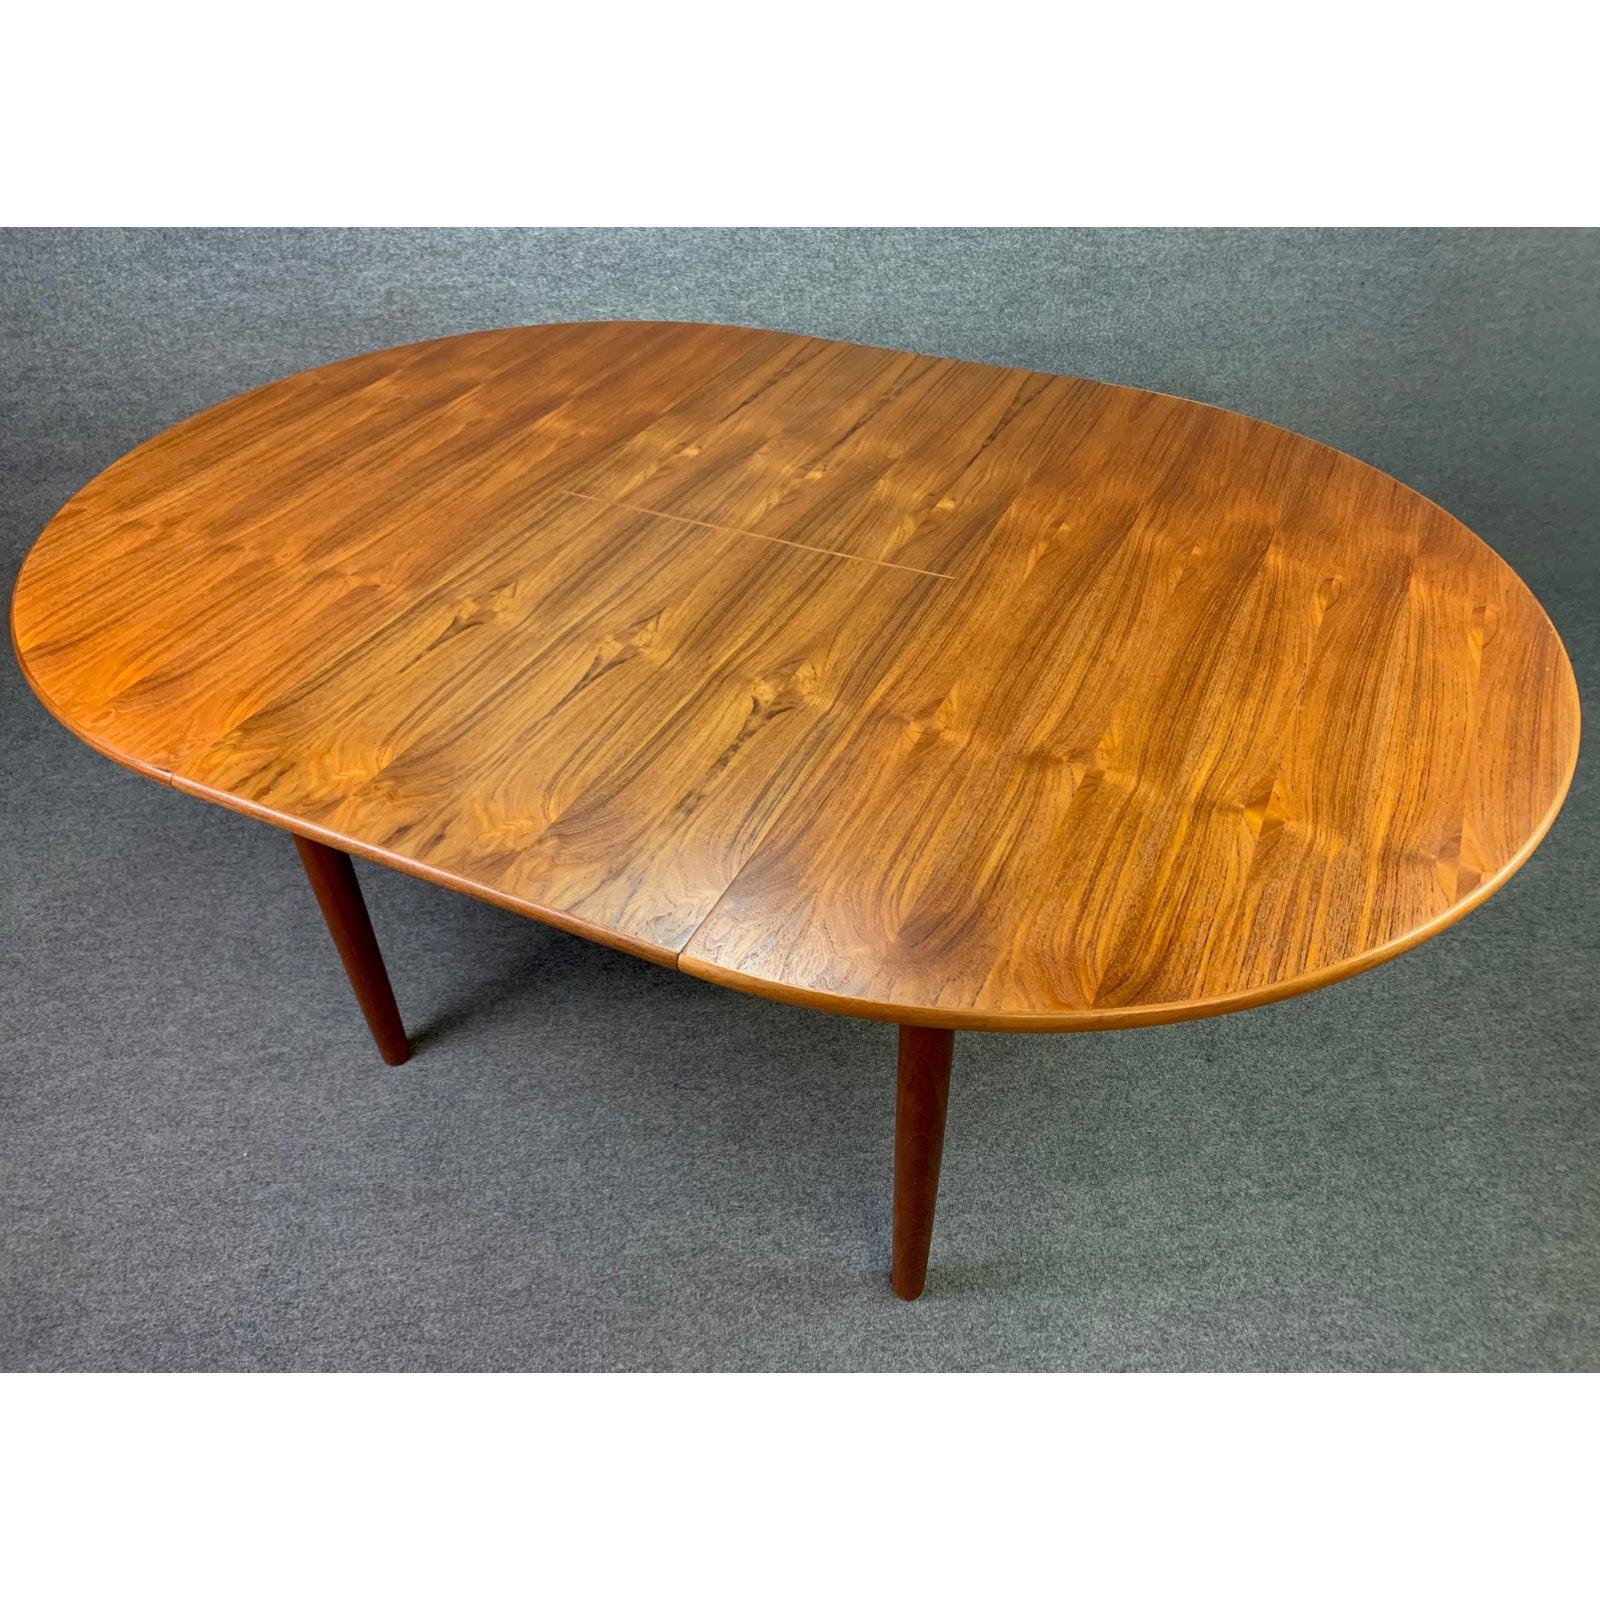 Here is a beautiful 1960s Scandinavian Modern dining table in teak wood ready for your modern interior.
This table, recently imported from Denmark to Caifornia before its restoration, features a vibrant wood grain, a butterfly leaf and four tapered